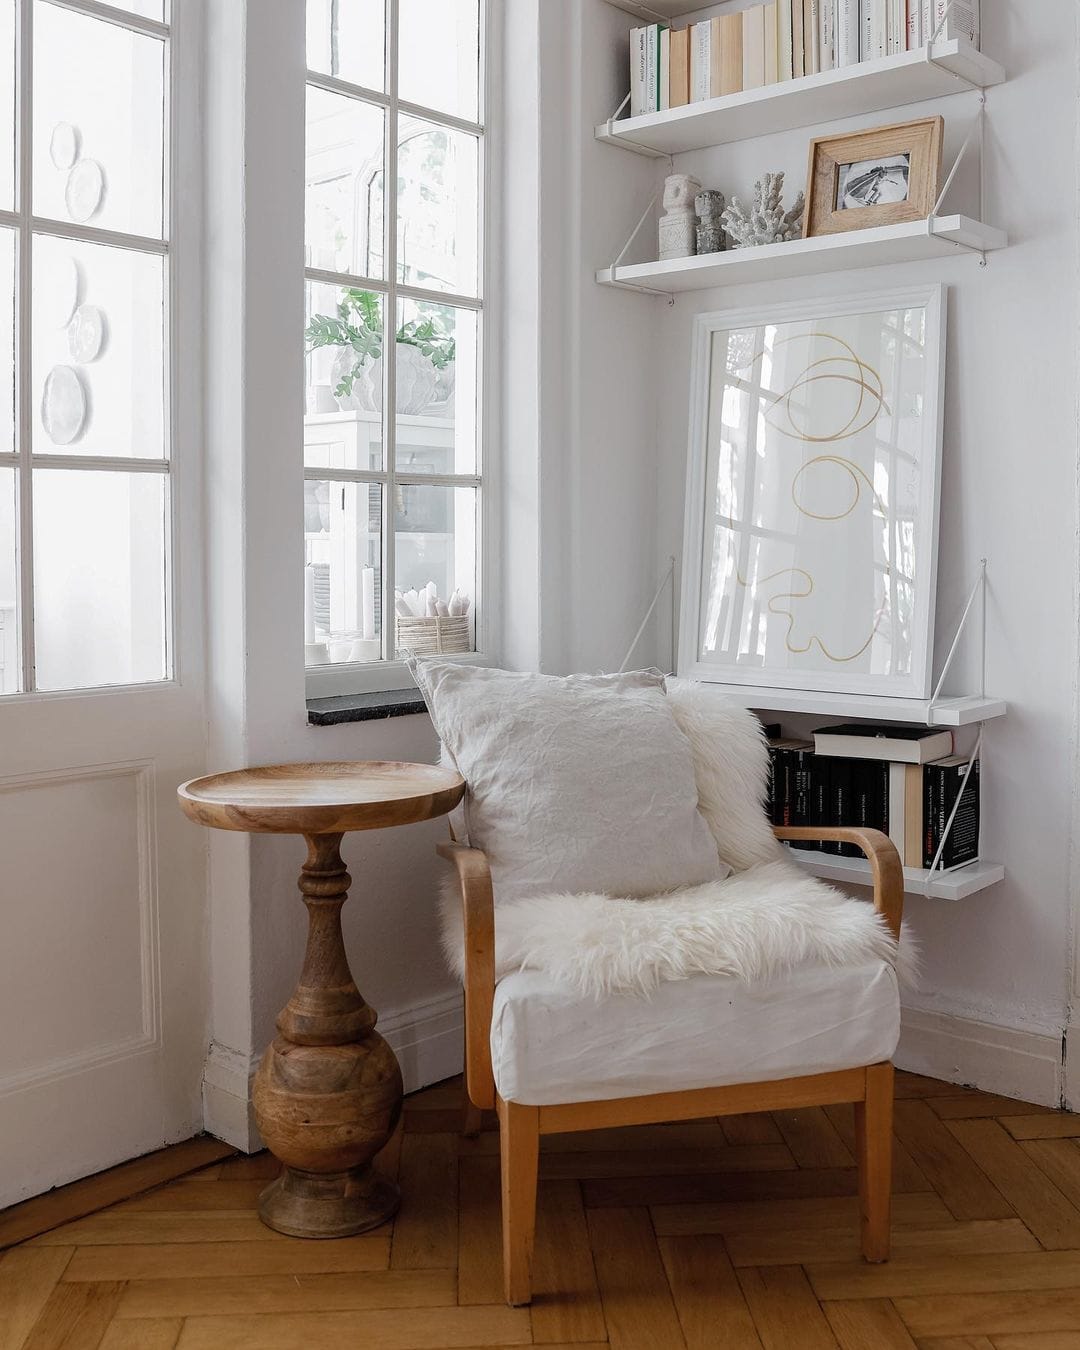 reading nook next to windows featured as a maximize natural light idea